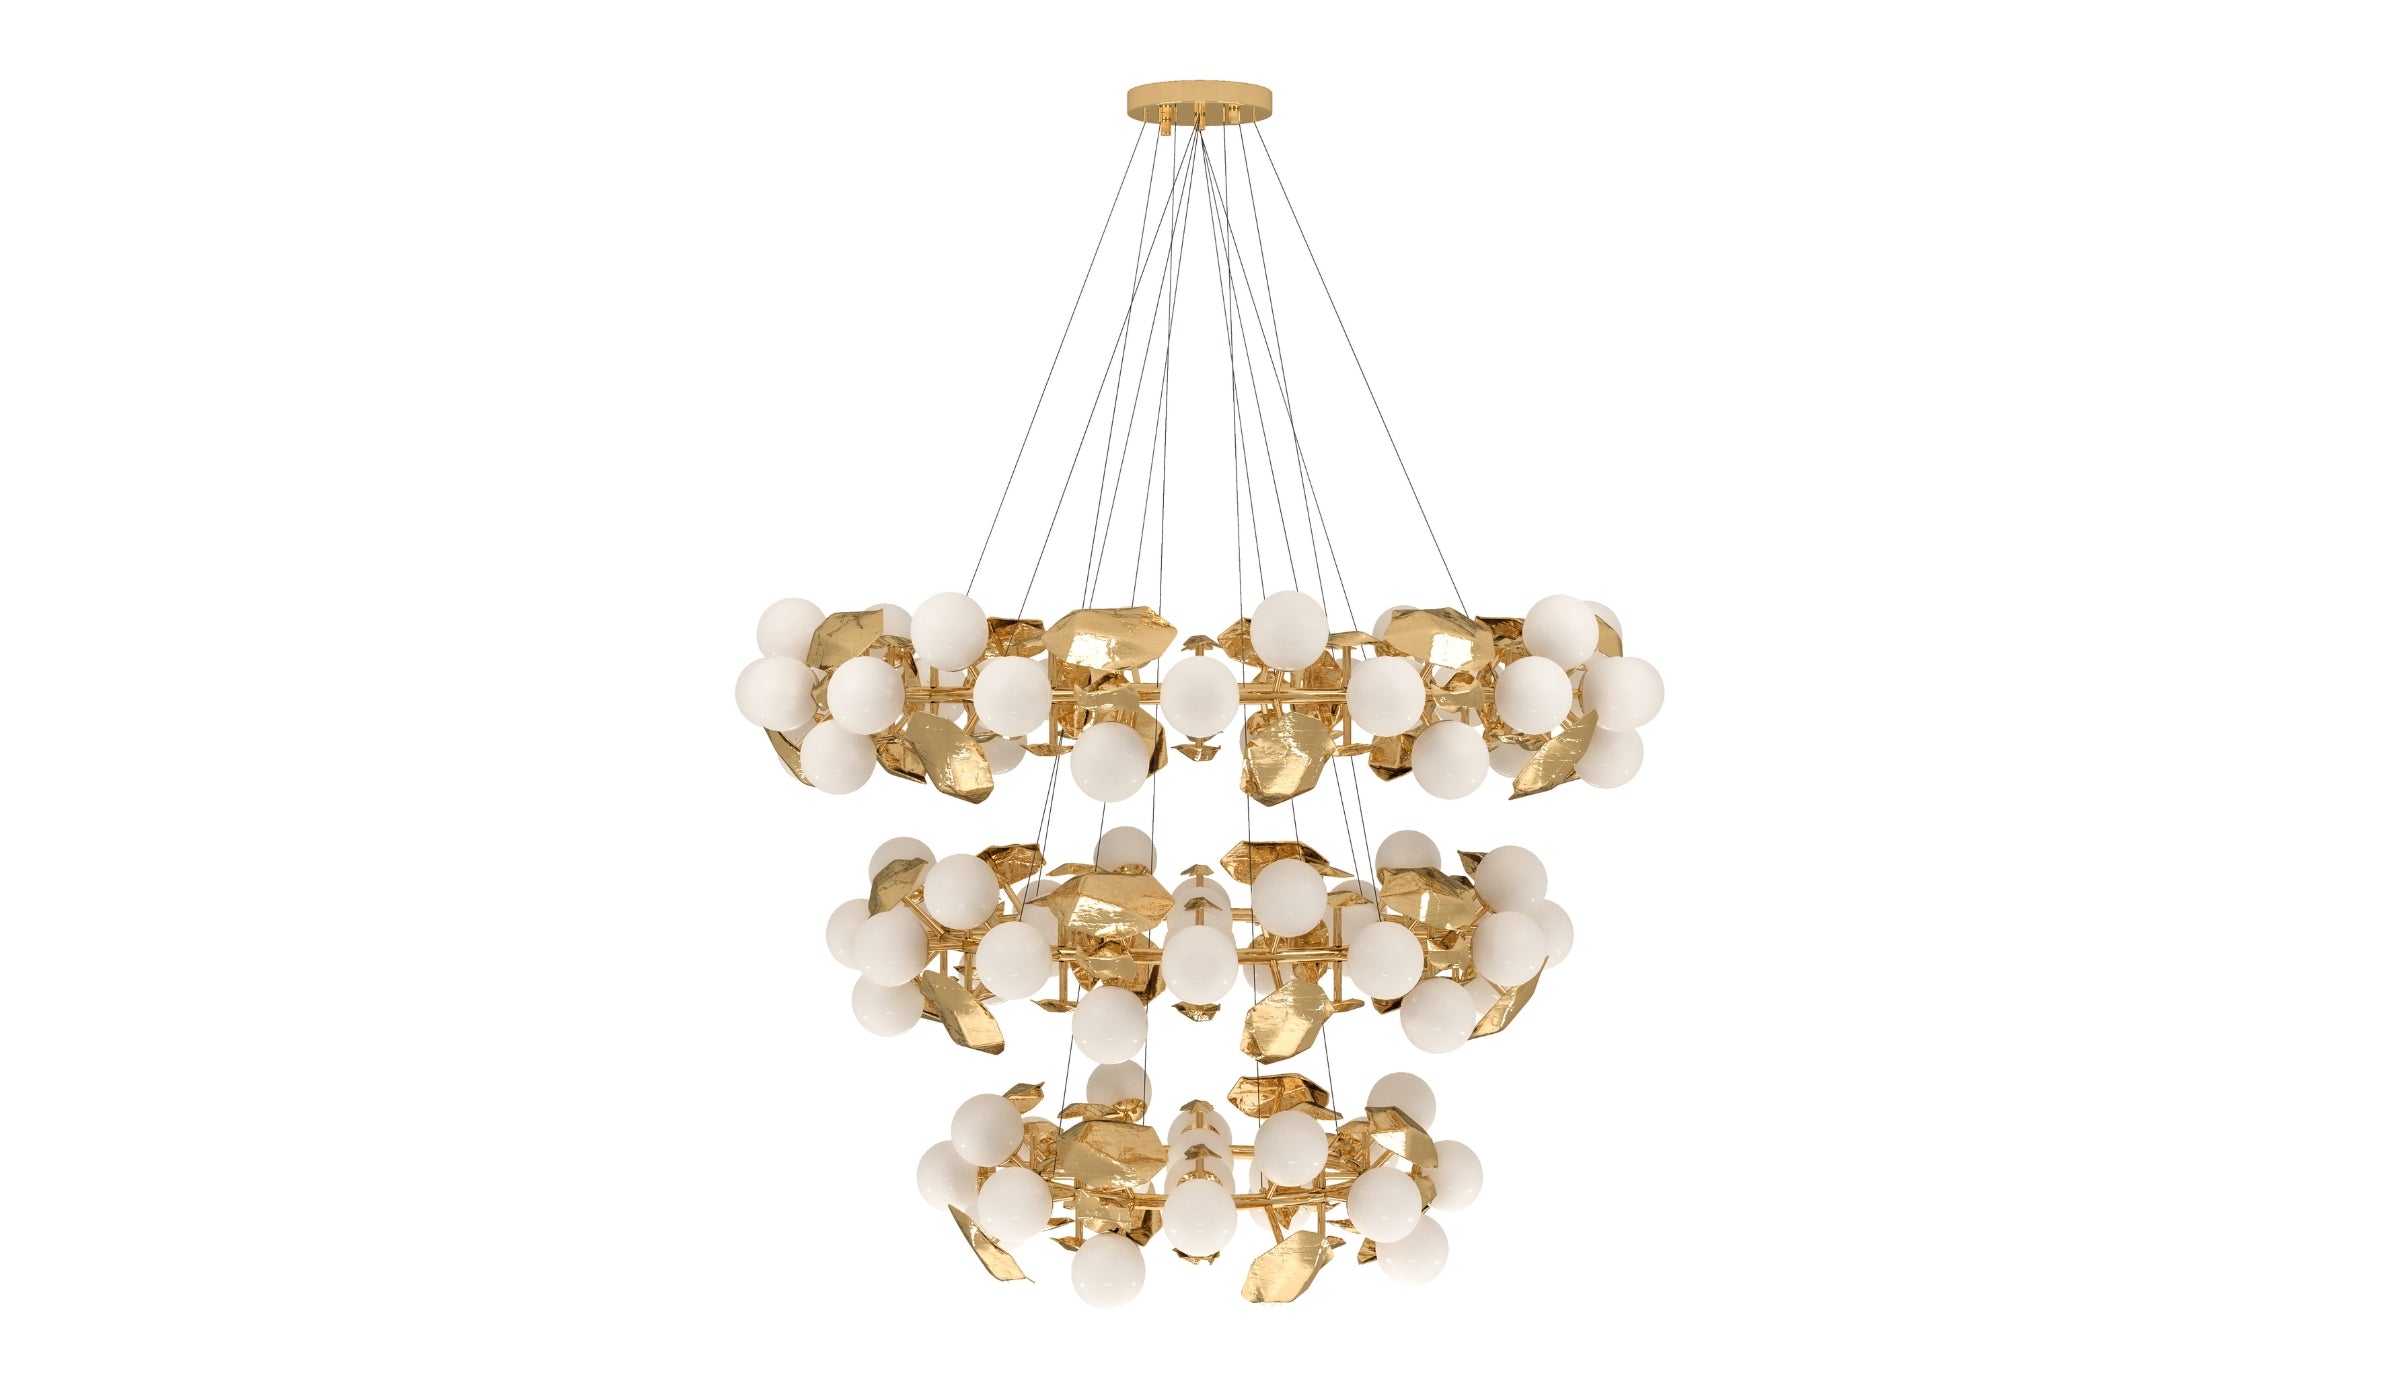 Hera round III - Majestic pendant light in polished brass and glass for sophisticated decoration